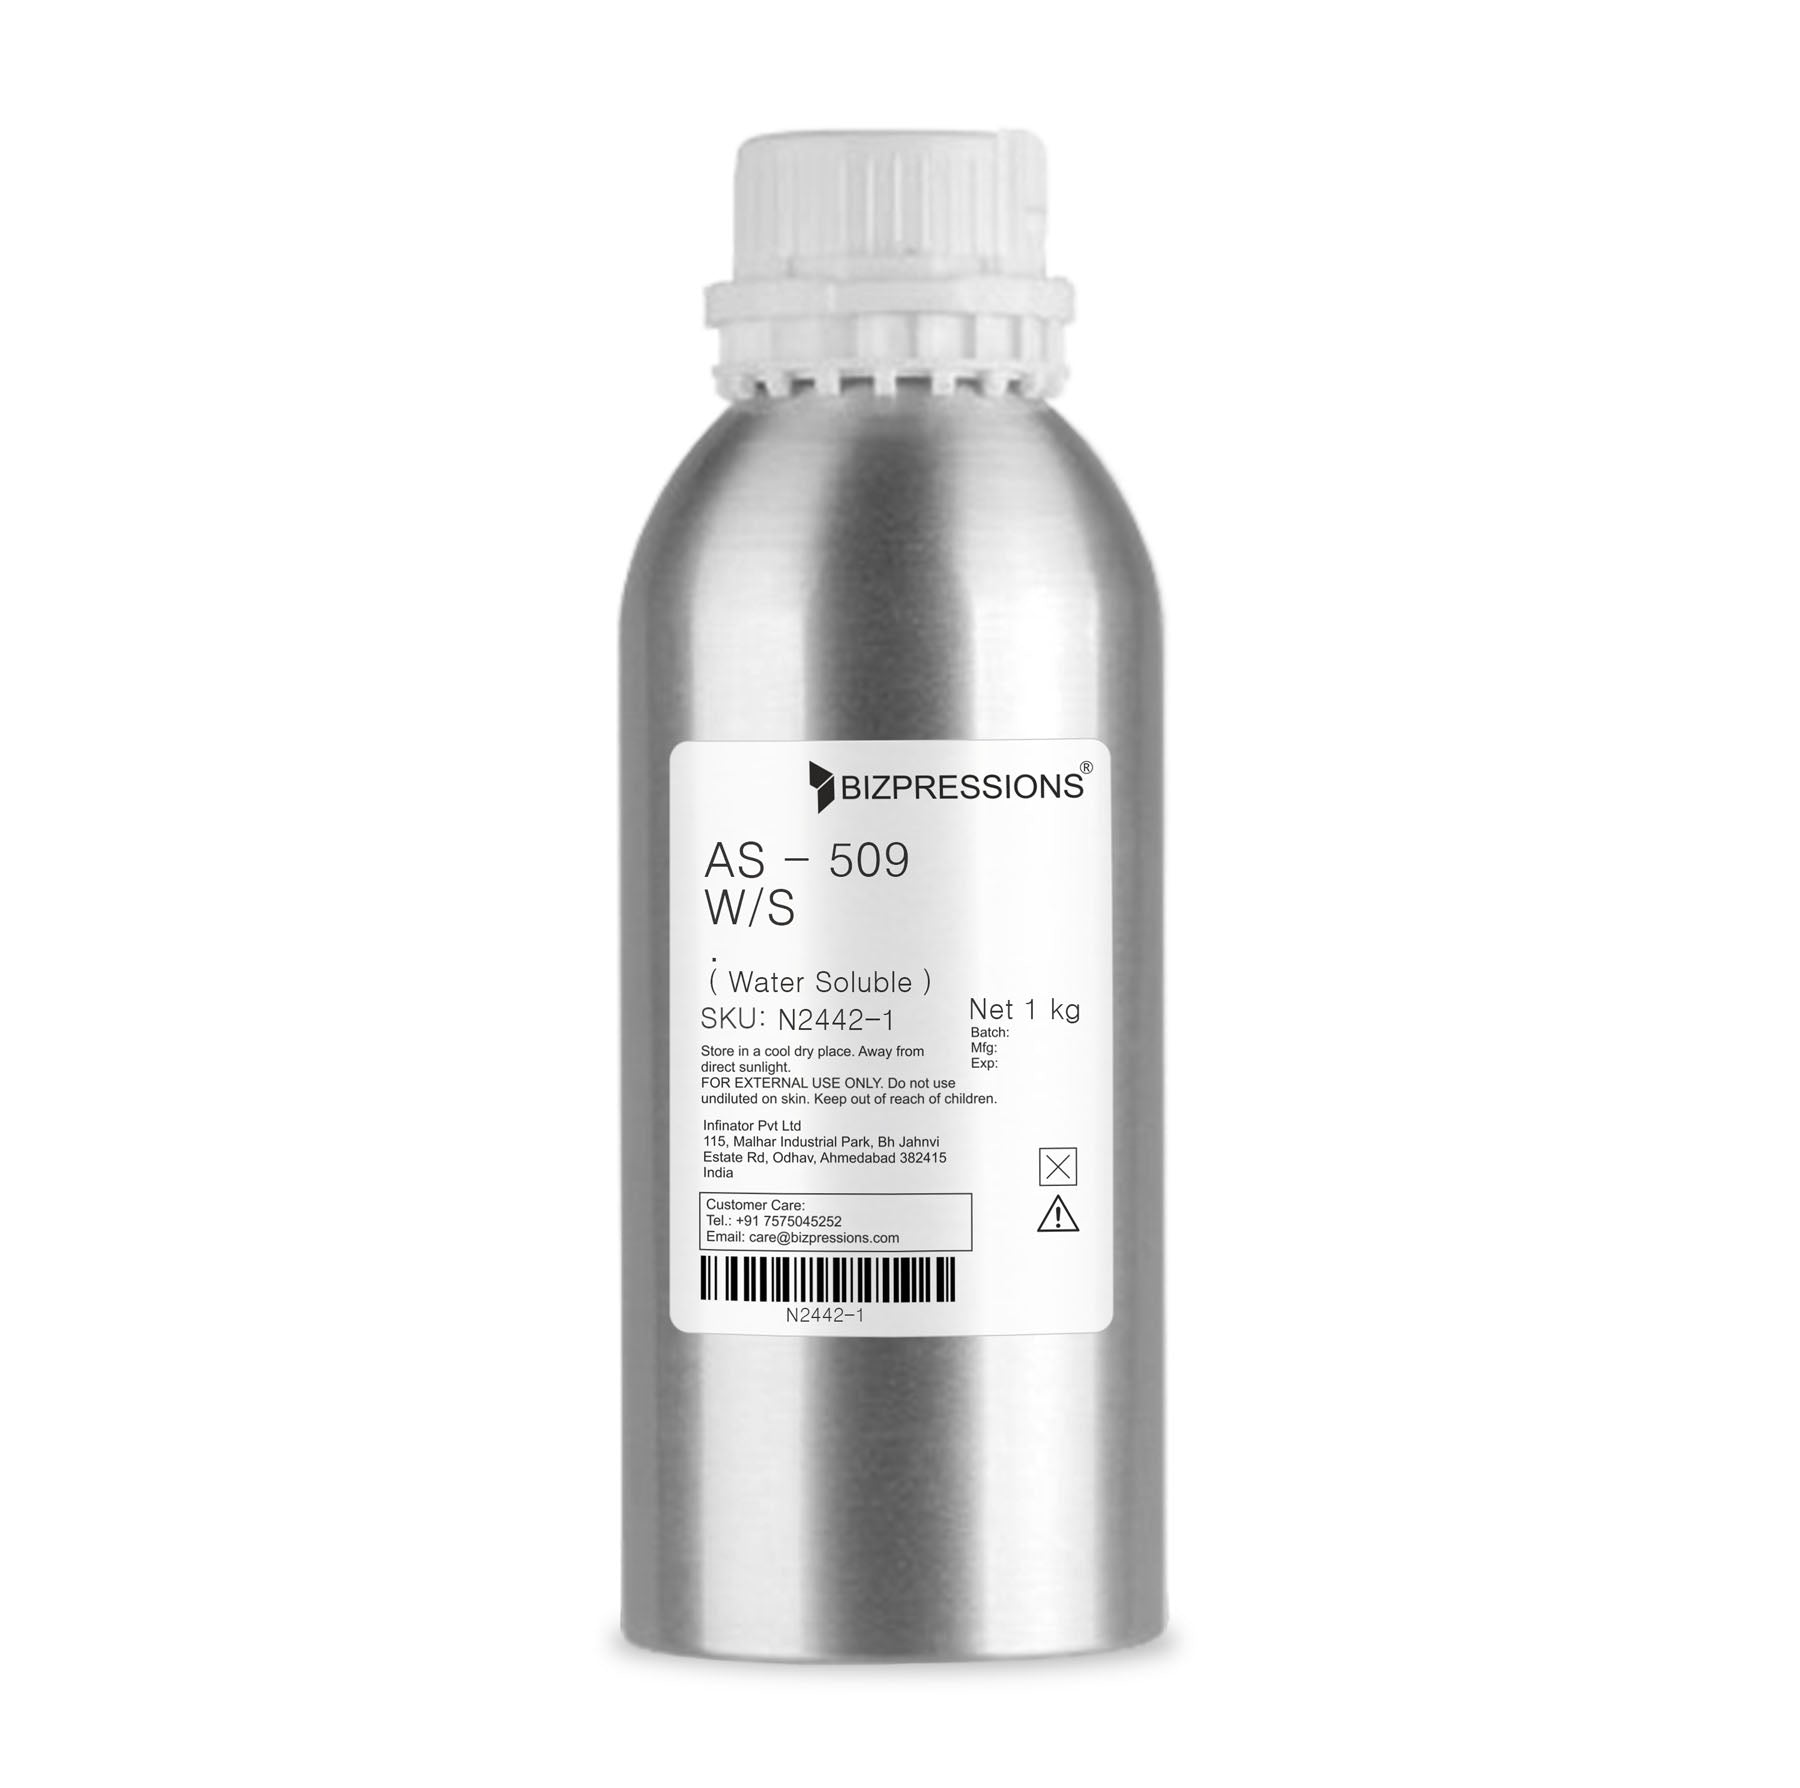 AS - 509 W/S - Fragrance ( Water Soluble ) - 1 kg